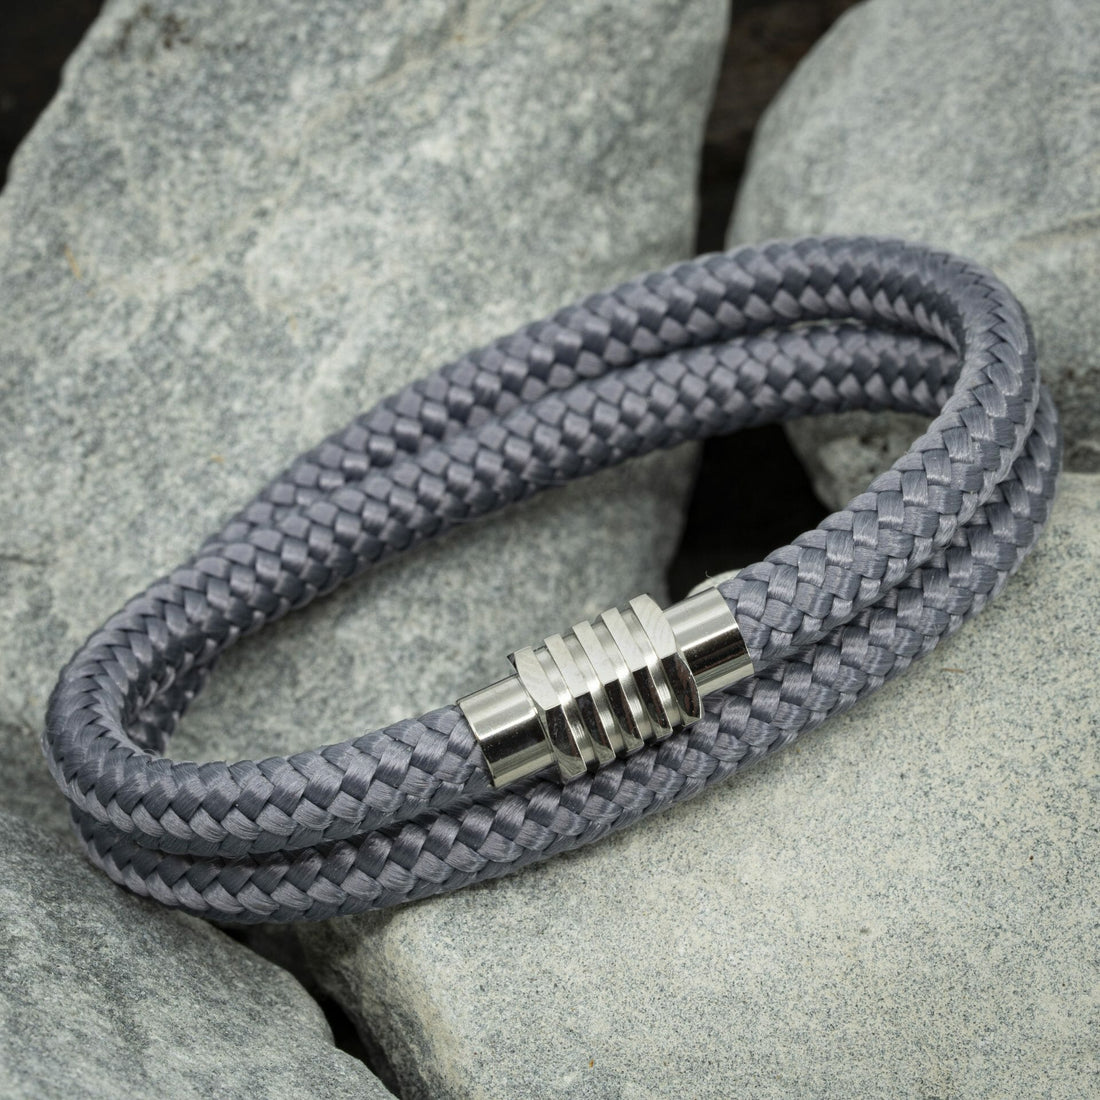 Own paracord bracelet - Gray rope